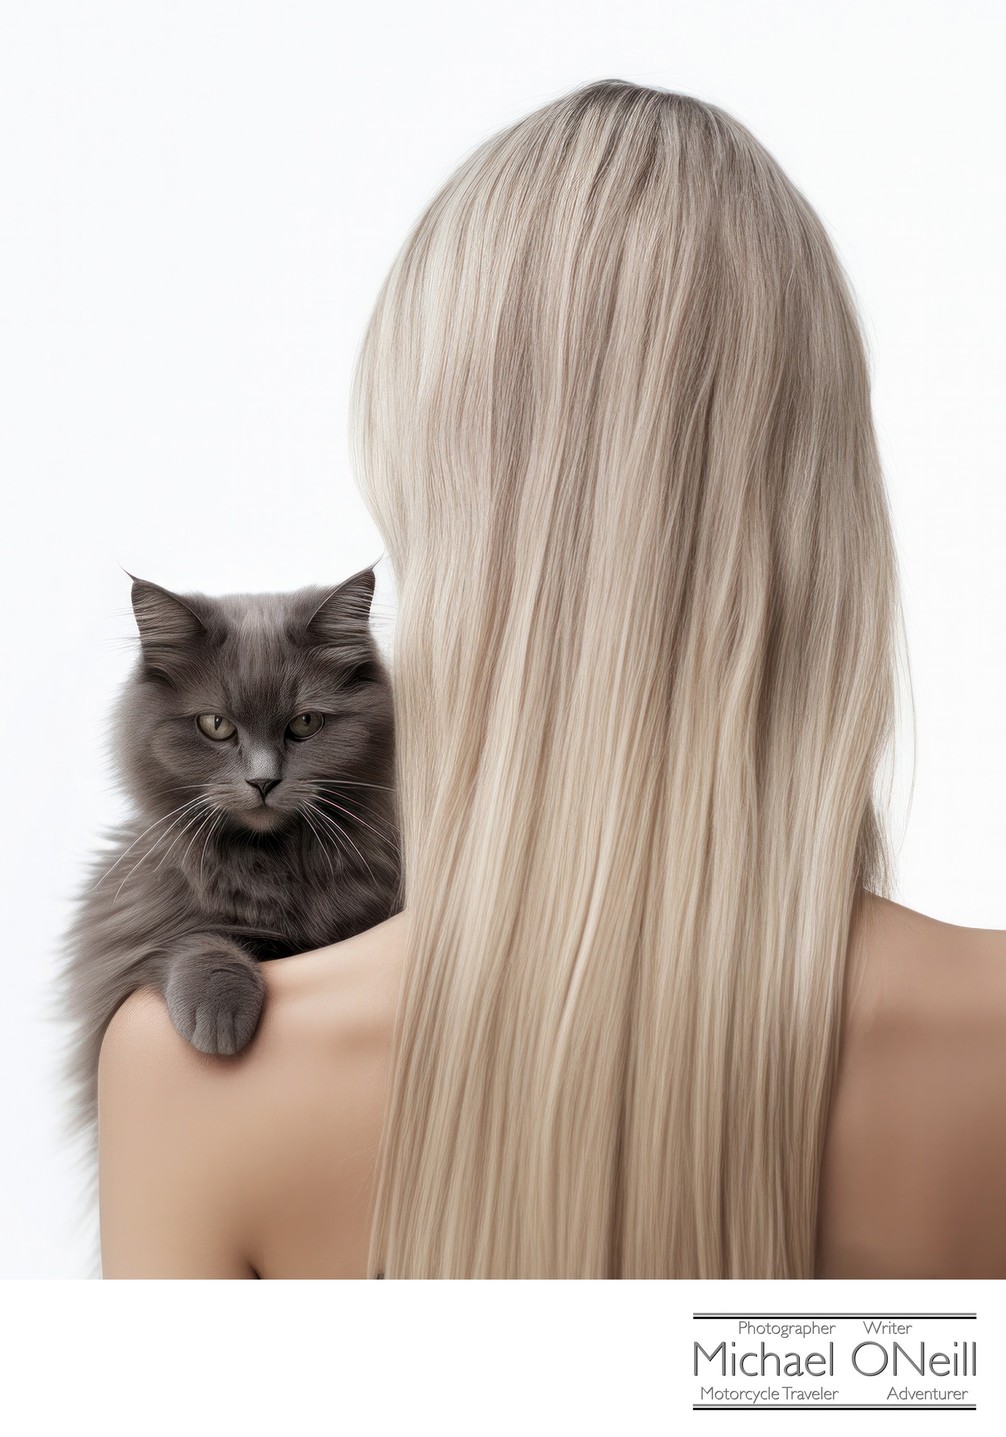 Striking Portrait Of A Maine Coon Cat On The Shoulder Of Its Human